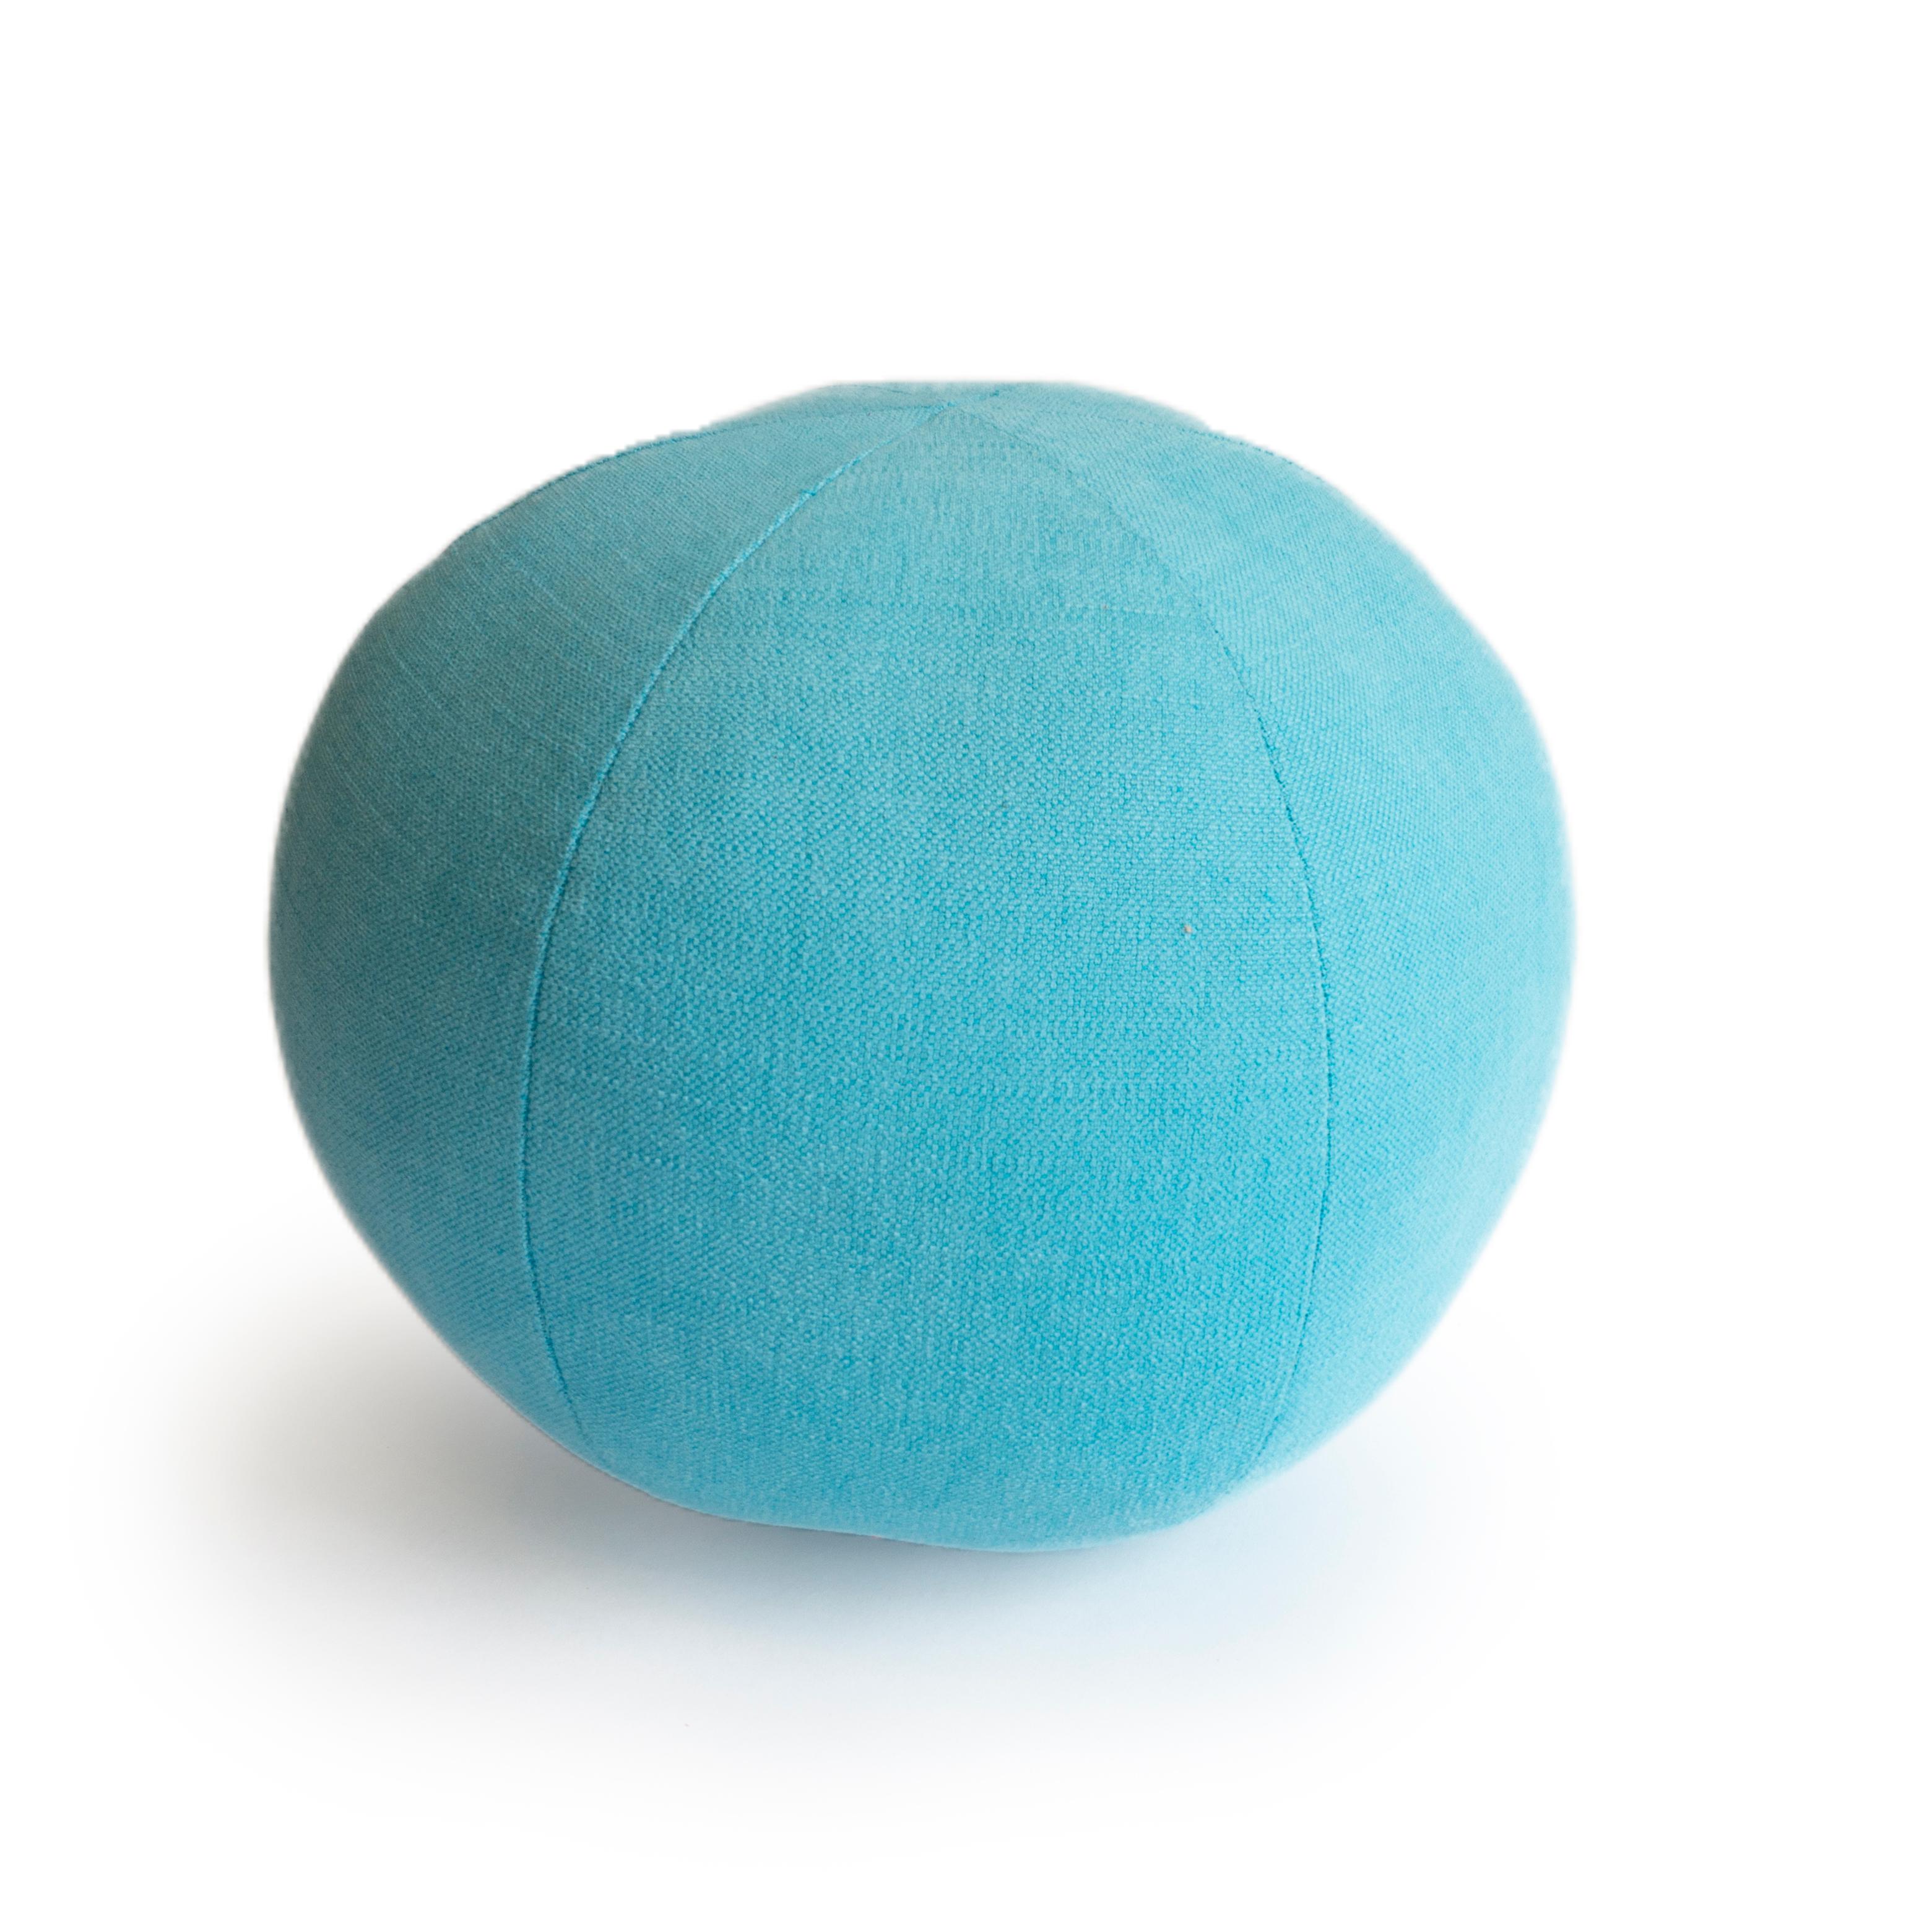 This hand sewn round ball throw pillow was handmade in a light blue cotton fabric. All pillows are made at our studio in Norwalk, Connecticut. 

Measurements: 9